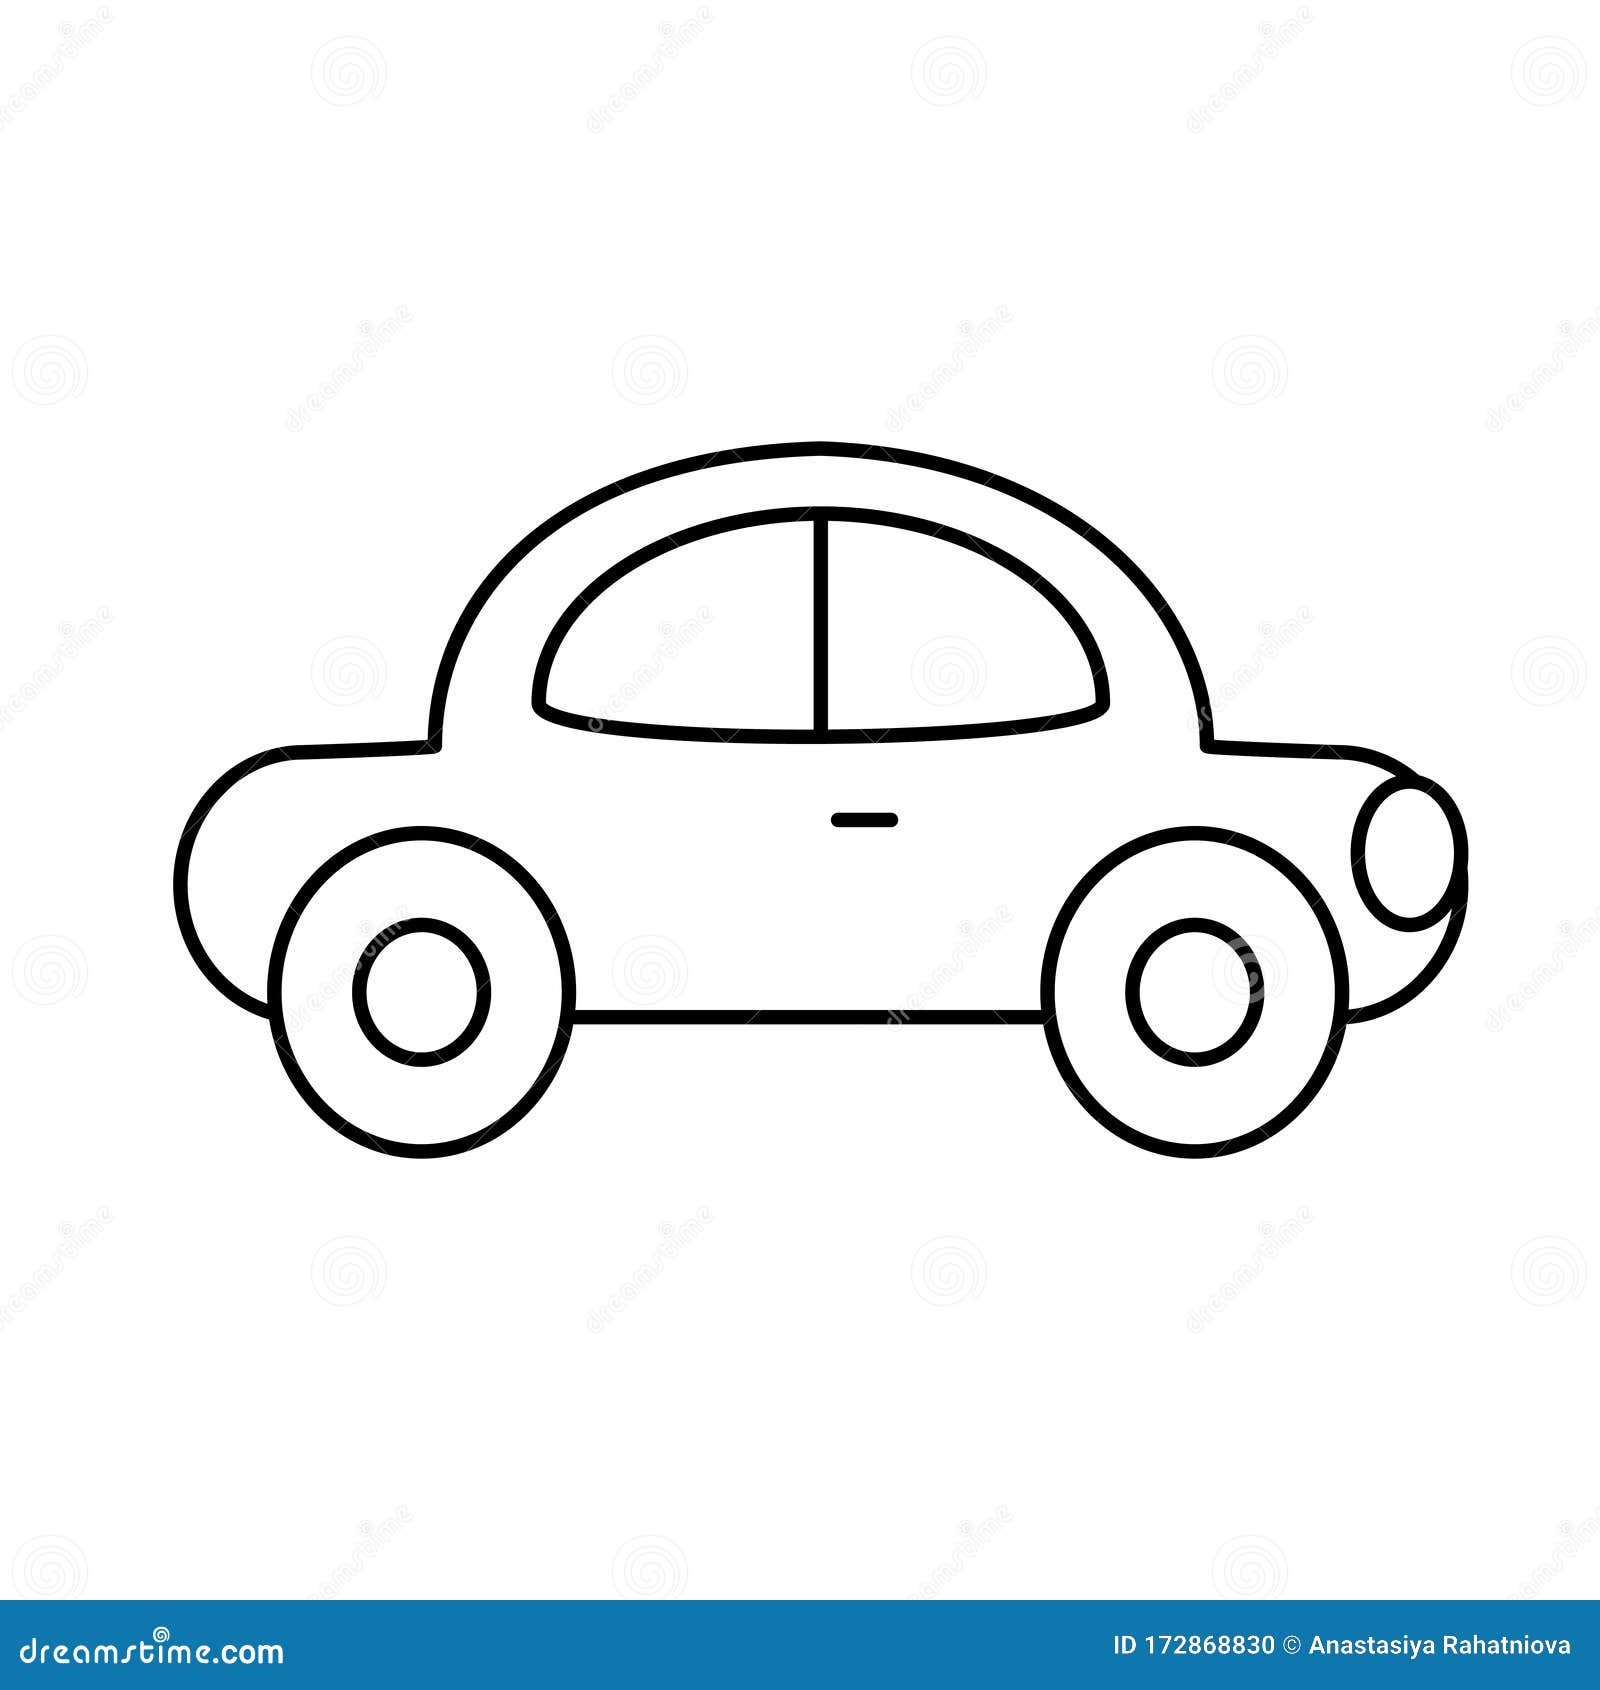 Coloring Page Outline Of Car Toy. Vector Illustration ...